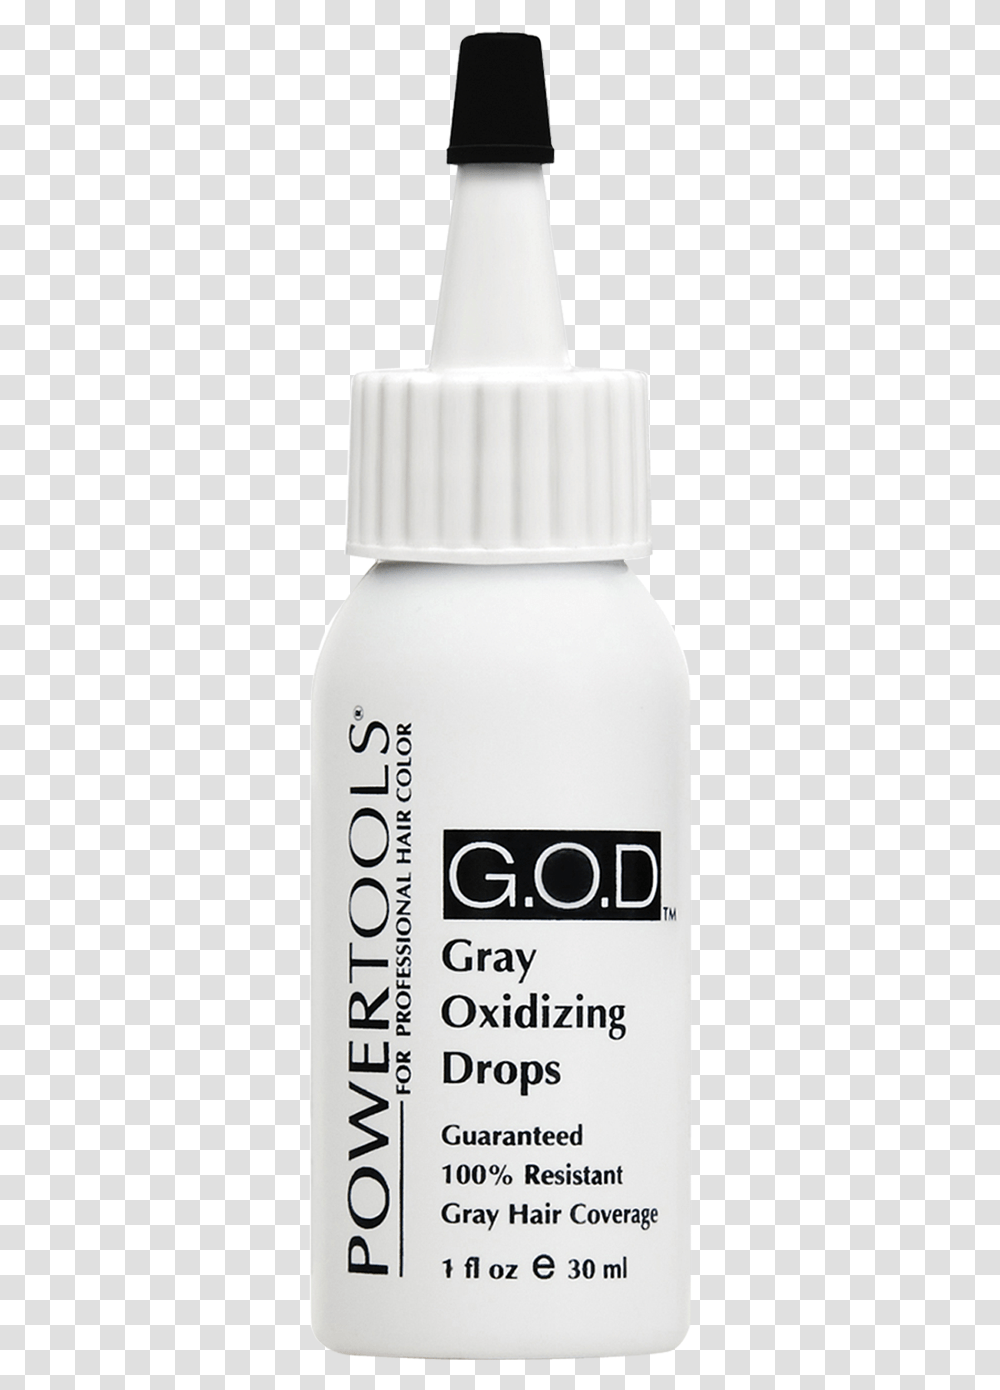 G O D Gray Oxidizing Drops Gray Oxidizing Drops, Tin, Can, Spray Can, Cosmetics Transparent Png